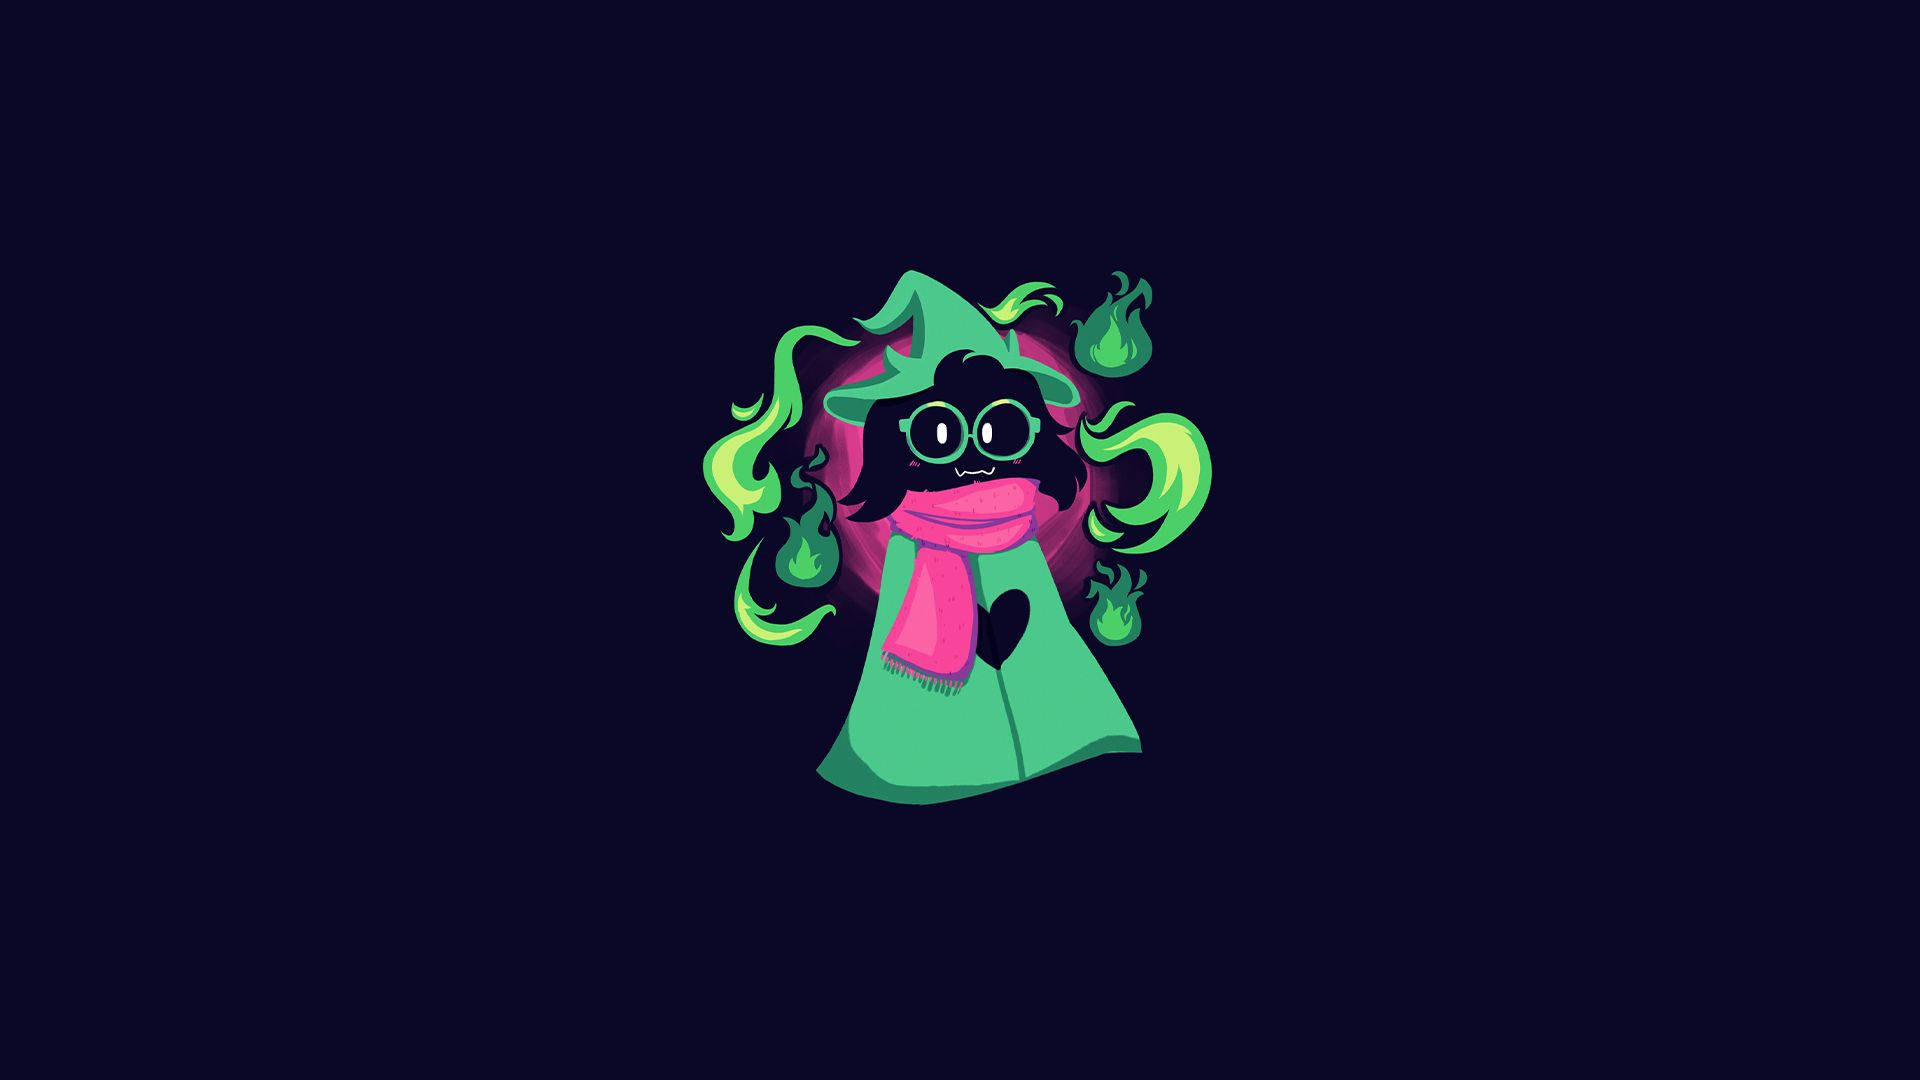 Deltarune Chapter 2' will release this week after surprise announcement